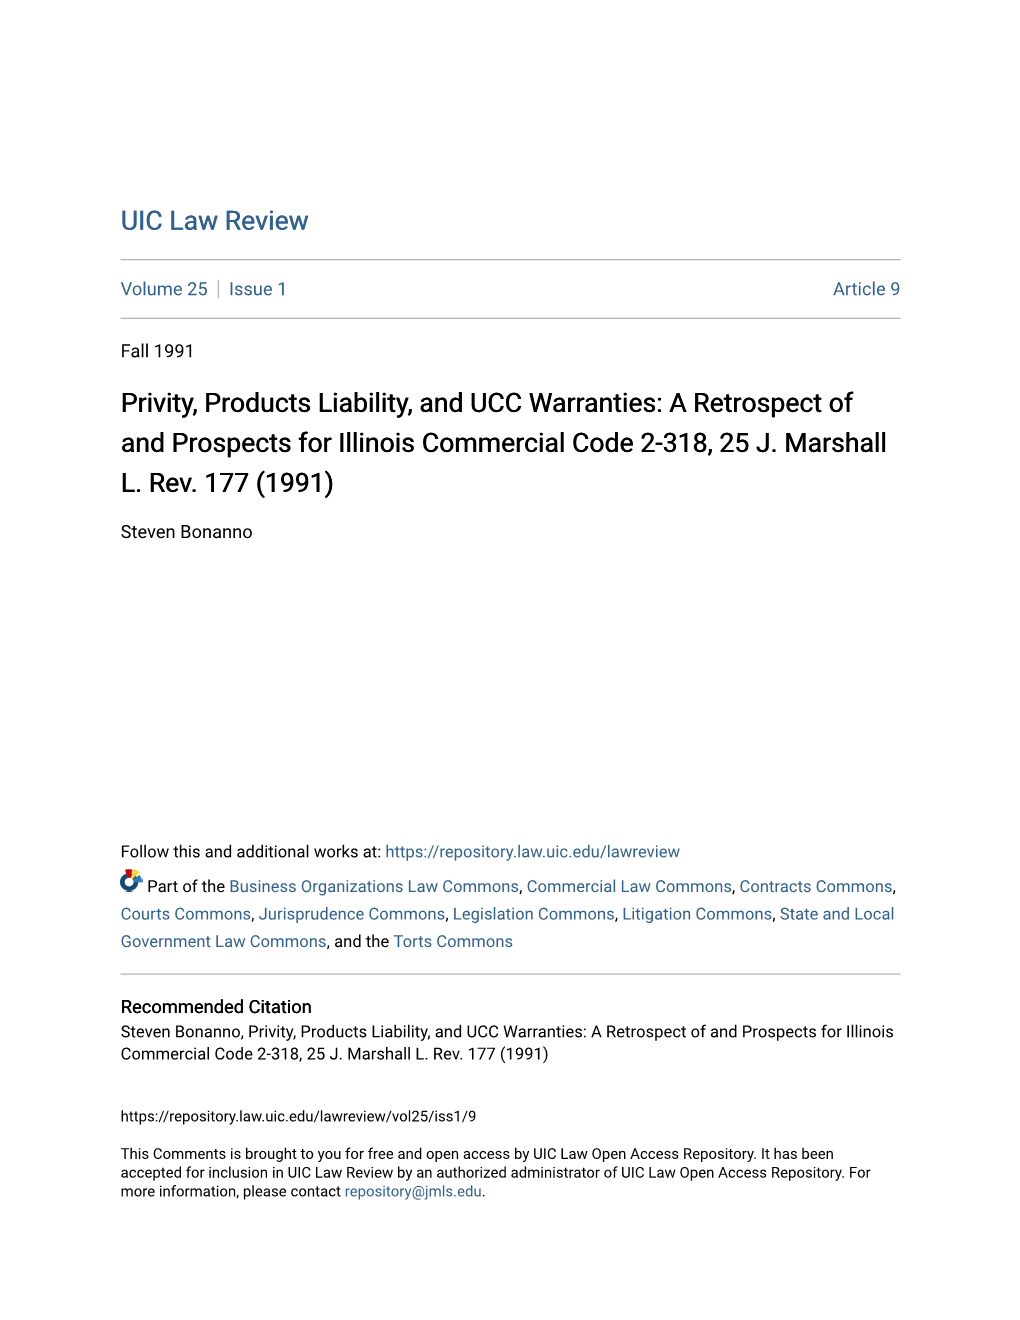 Privity, Products Liability, and UCC Warranties: a Retrospect of and Prospects for Illinois Commercial Code 2-318, 25 J